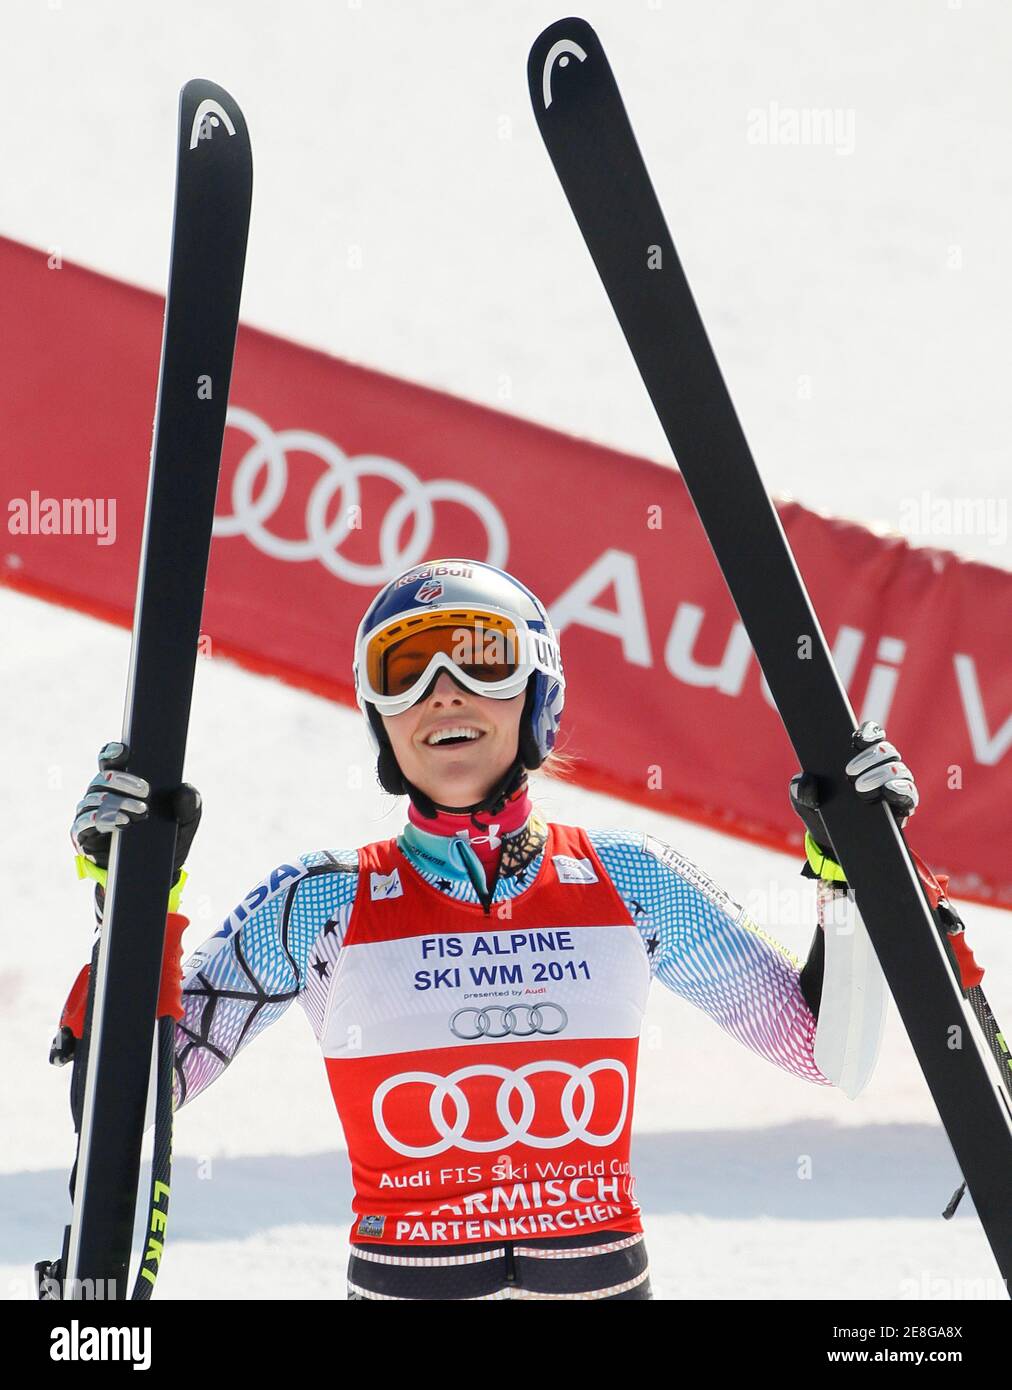 Lindsey Vonn of the U.S. celebrates victory at the women's Alpine Skiing World Cup Super G race in Garmisch-Partenkirchen March 12, 2010.  REUTERS/Miro Kuzmanovic (GERMANY - Tags: SPORT SKIING) Stock Photo